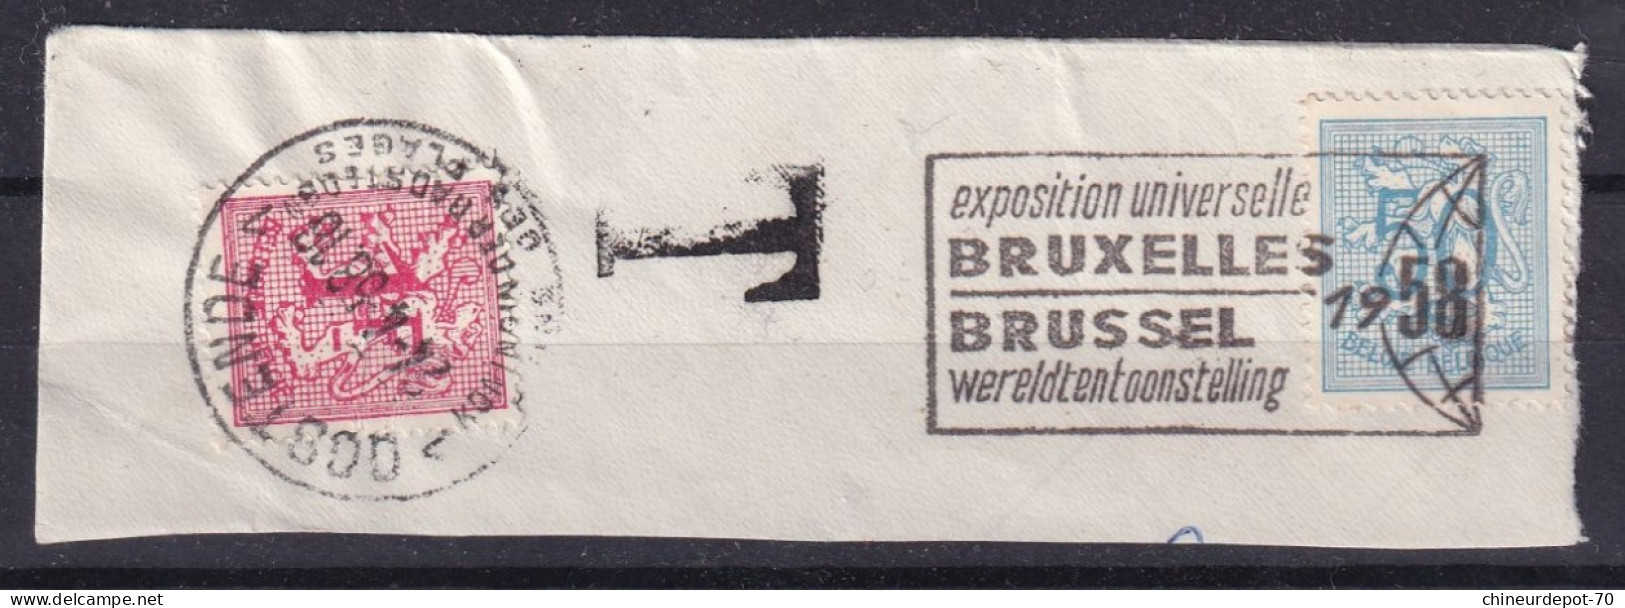 TIMBRES T Taxes CHIFFRES OOSTENDE BRUXELLES EXPOSITION 1958 - Stamps